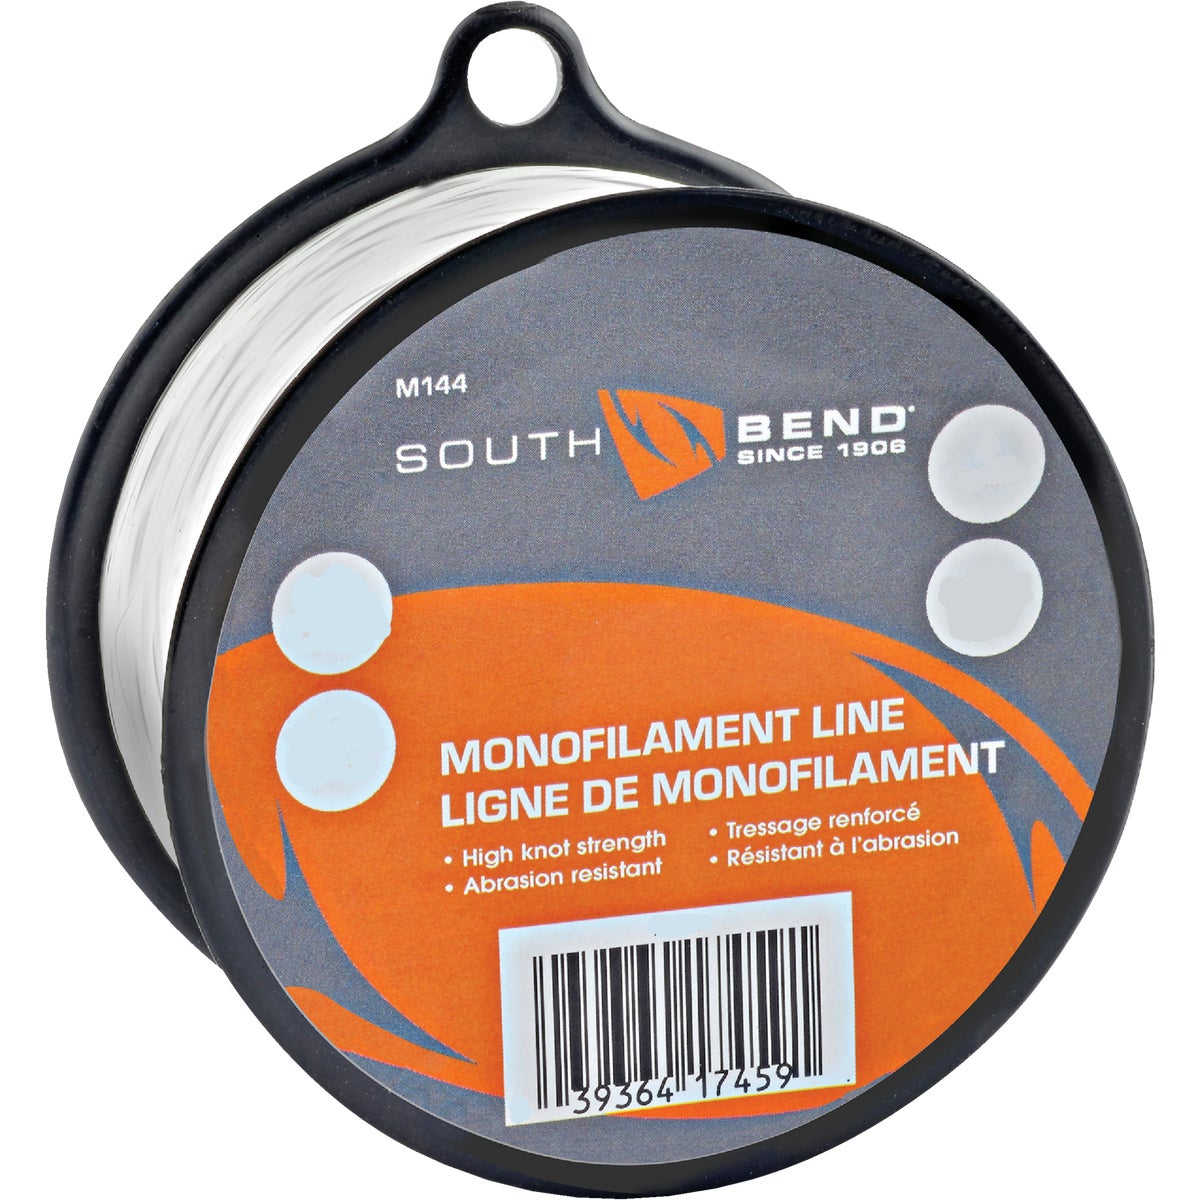 SouthBend 15 Lb. 370 Yd. Clear Monofilament Fishing Line